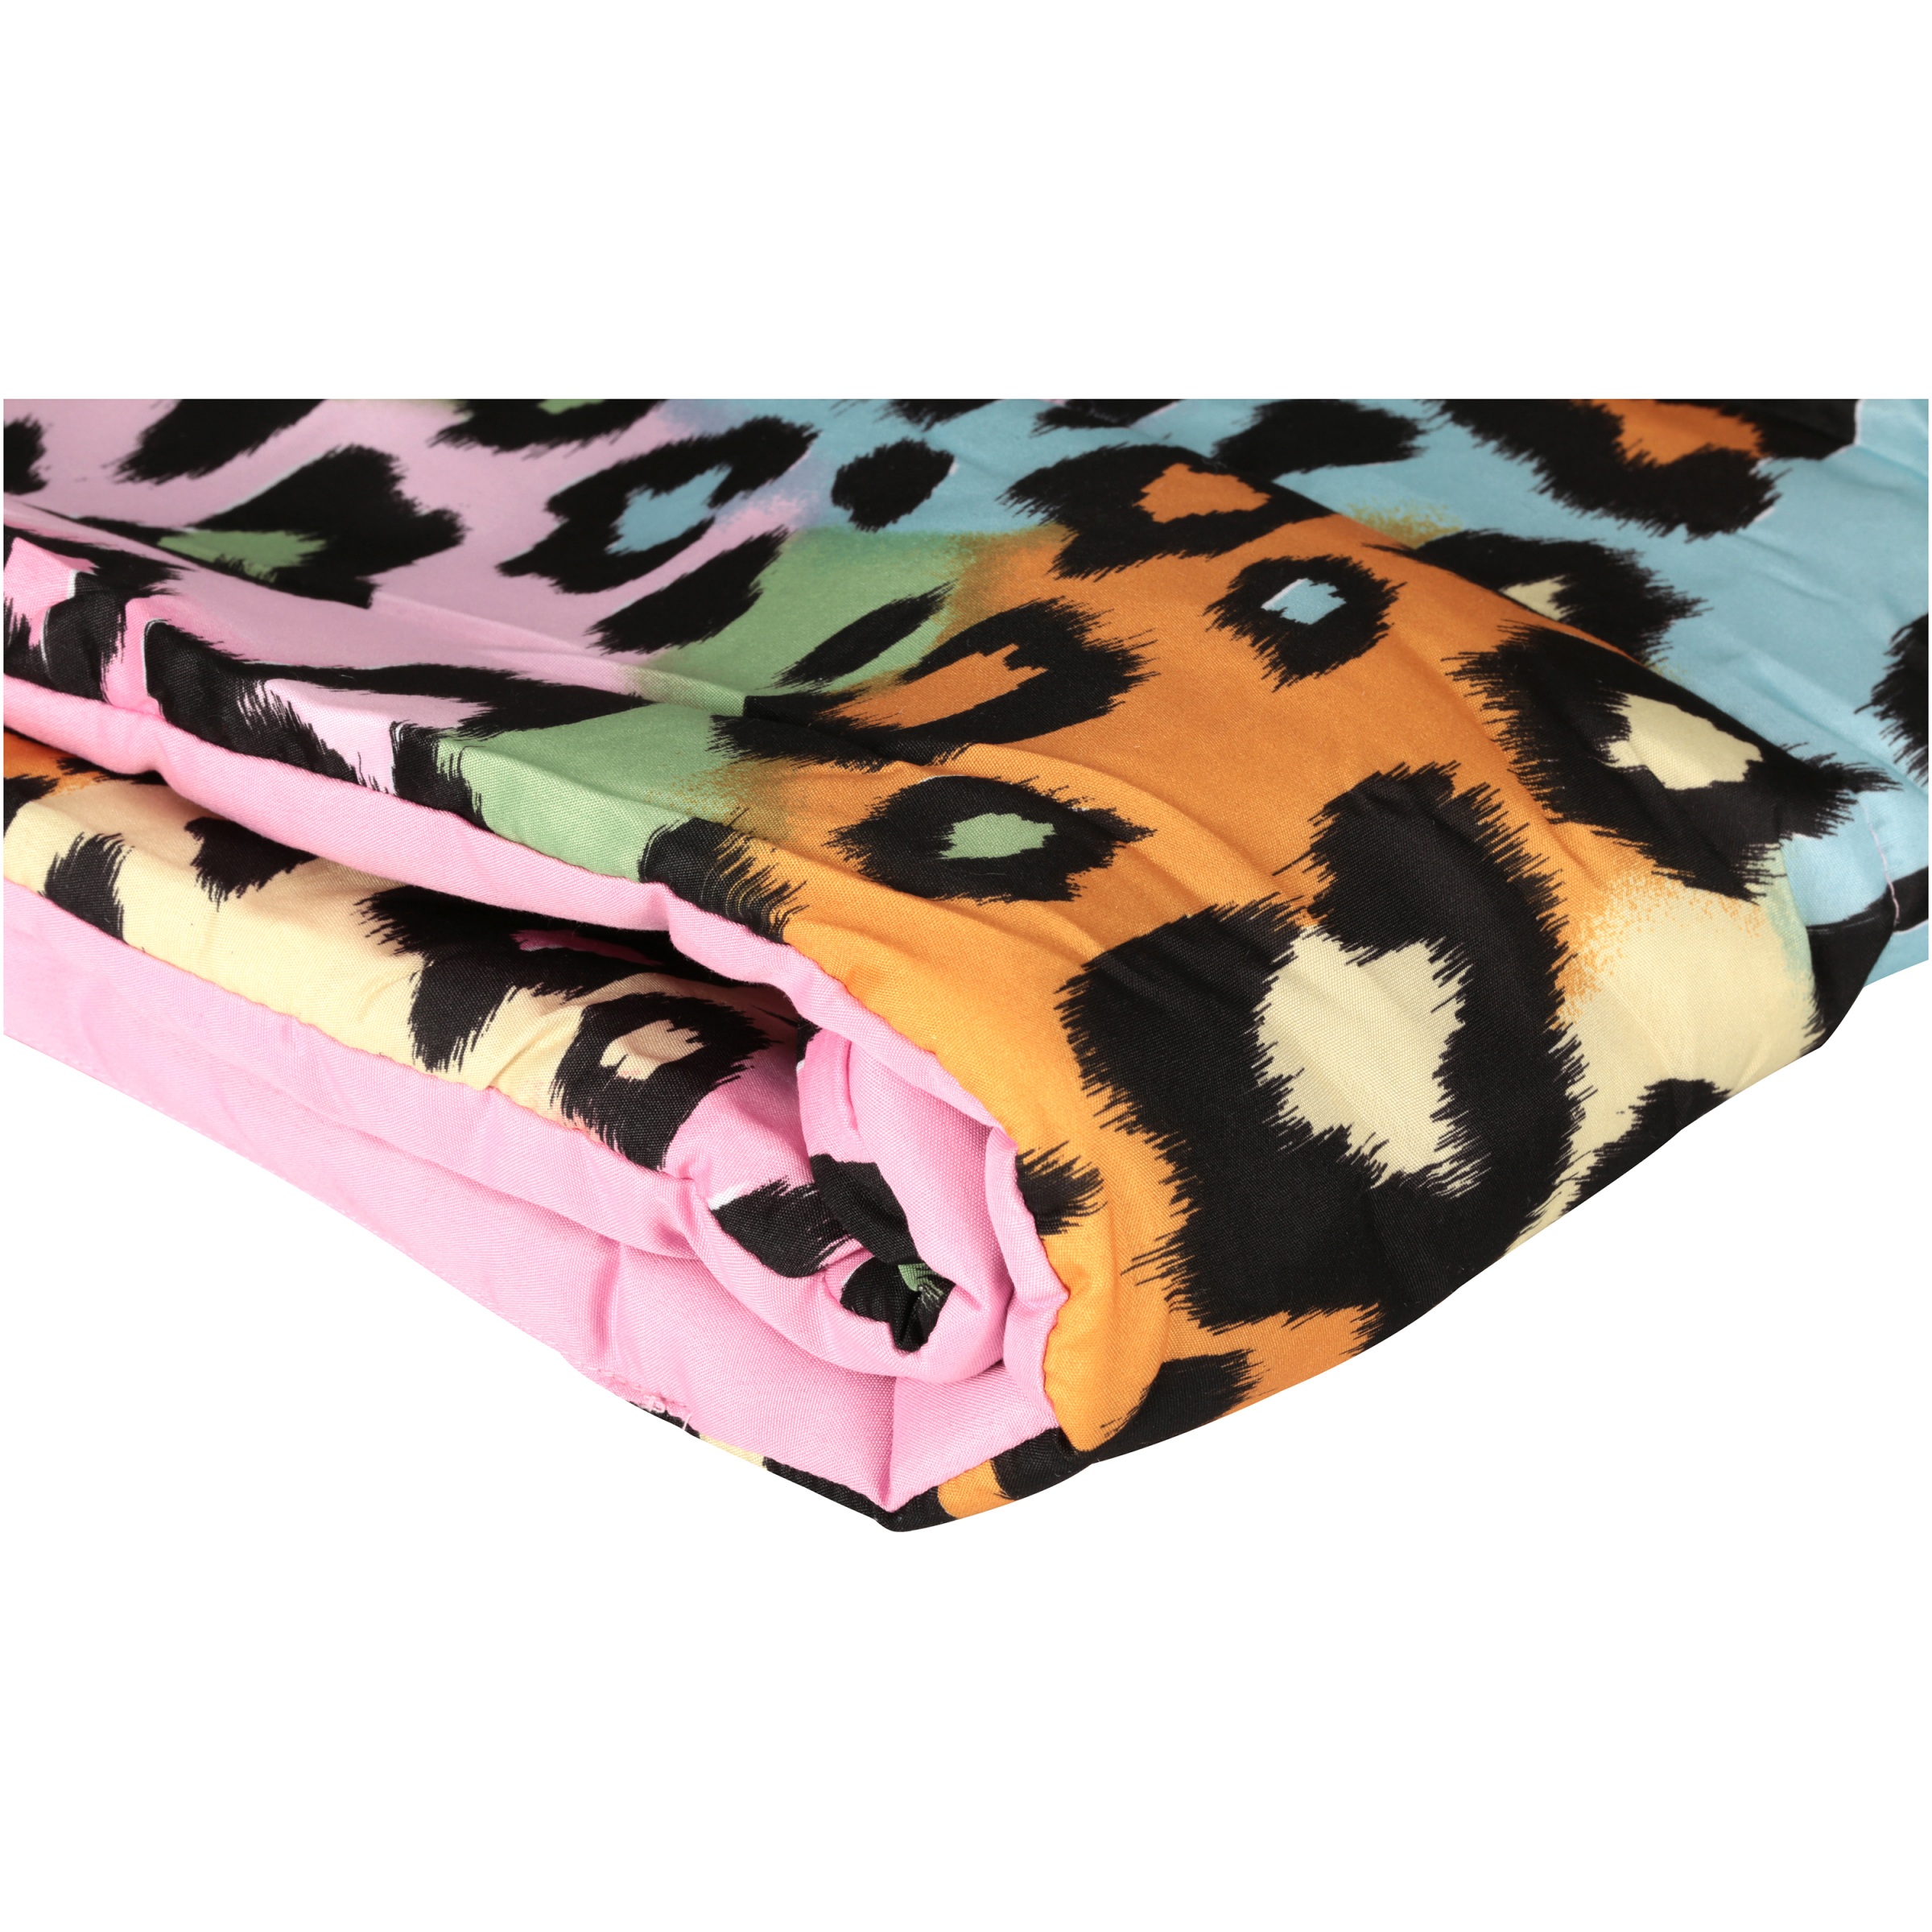 My Room Leopard Twin 5 Piece Bed in a Bag Bedding Set, Polyester, Pink, Sky Blue, Multi, Female, Child - image 4 of 4